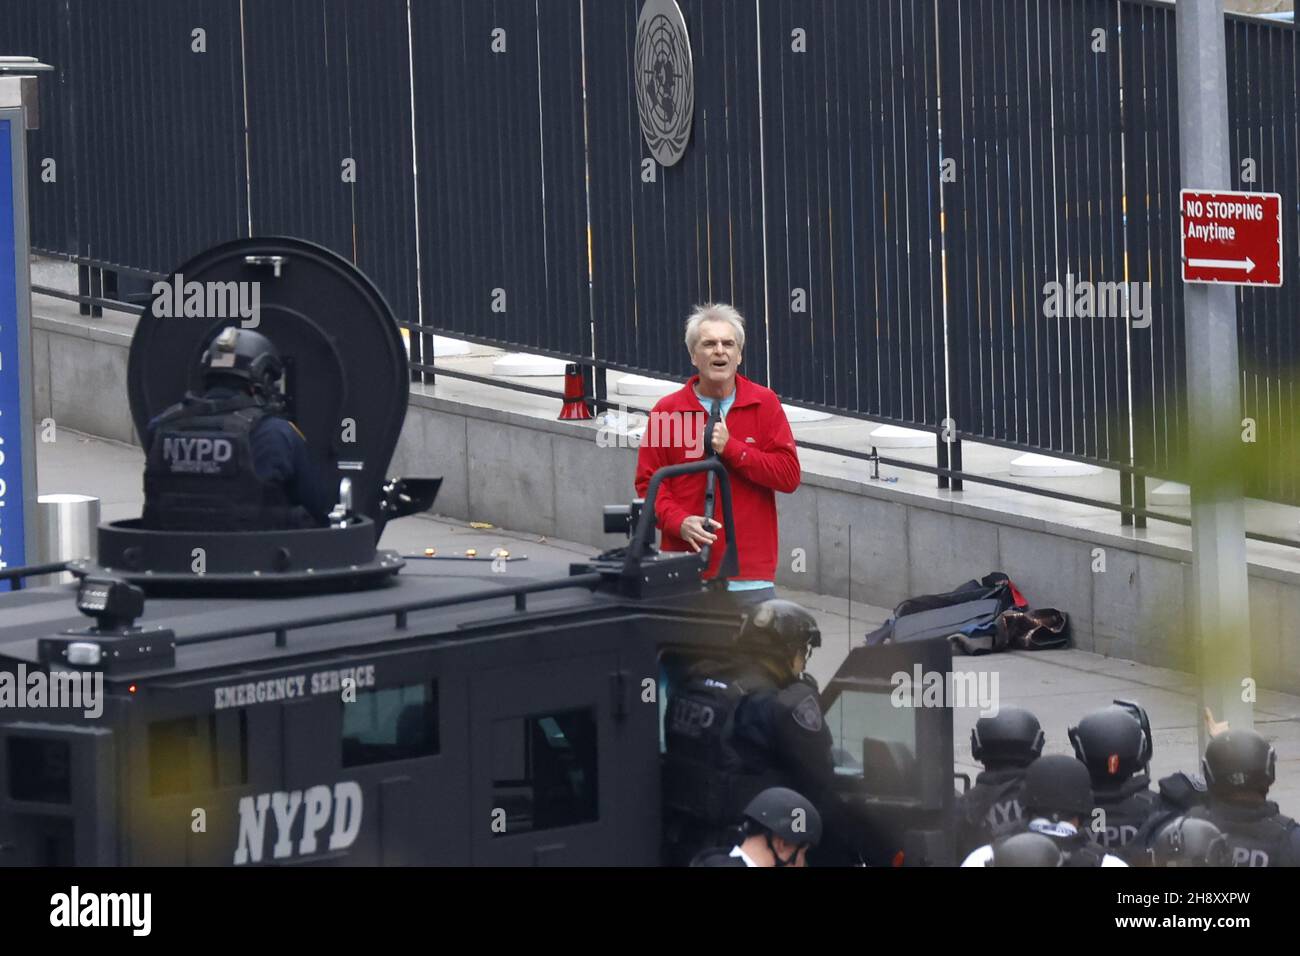 New York, United States. 02nd Dec, 2021. New York Police Department officers patrol the outside of the UN building complex during a standoff with a gunman (red coat) in New York on Thursday, December 2, 2021. The gunman surrendered. Photo by John Angelillo/UPI Credit: UPI/Alamy Live News Stock Photo